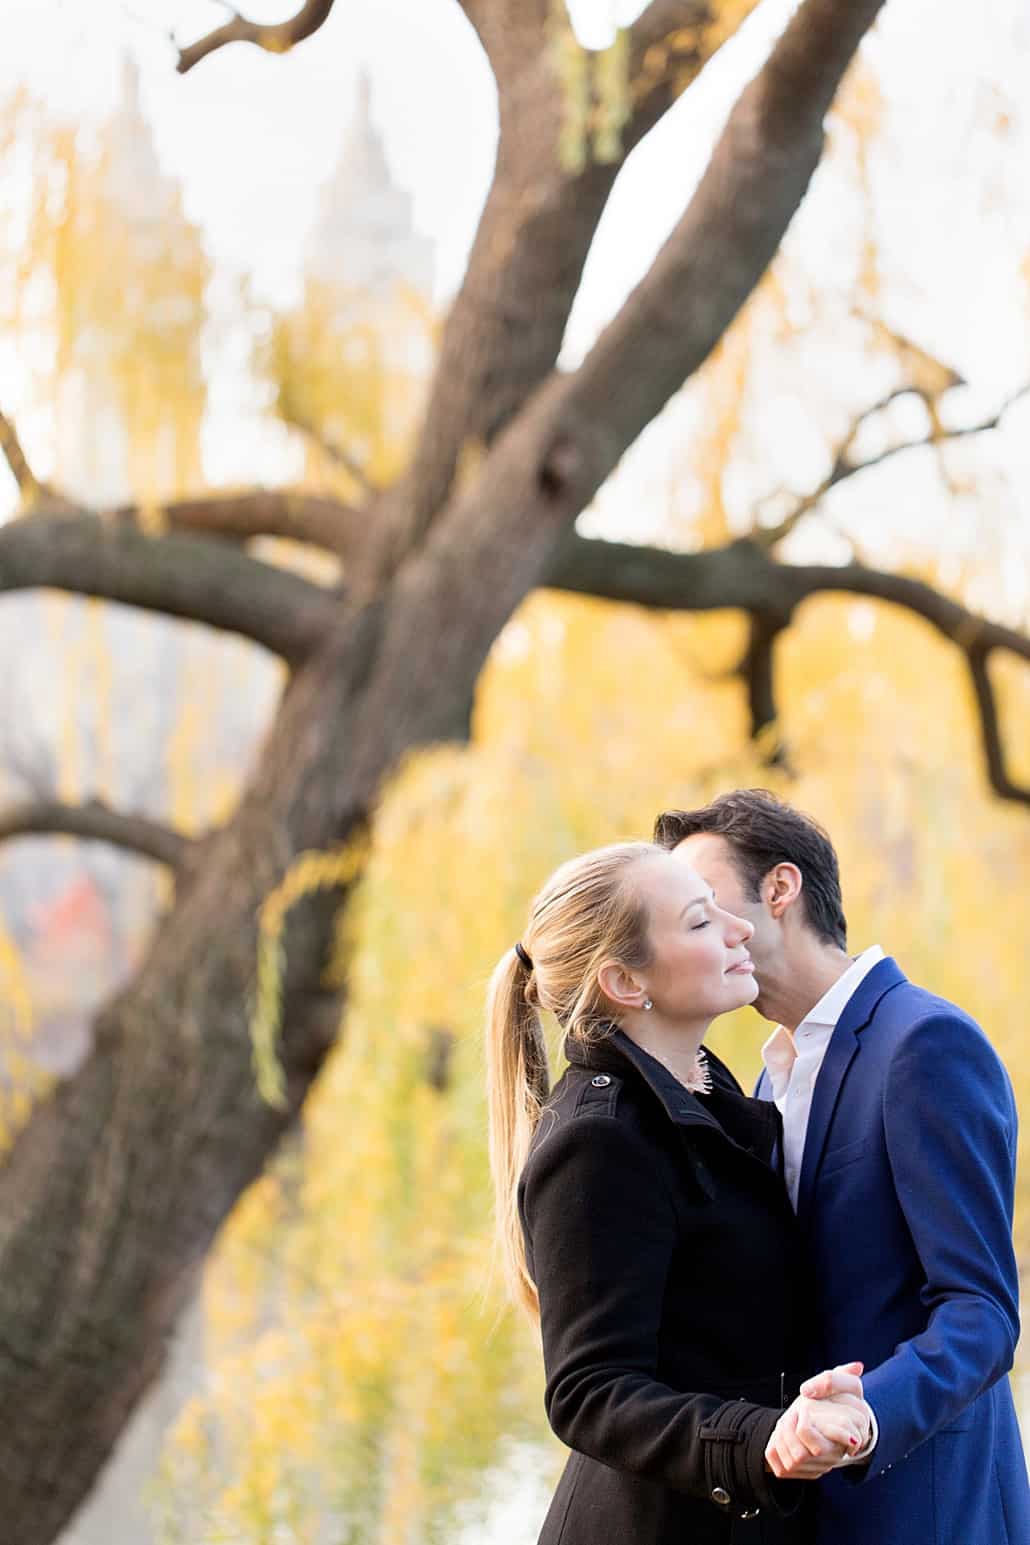 NYC winter engagement photo: kiss with yellow willow tree in the background